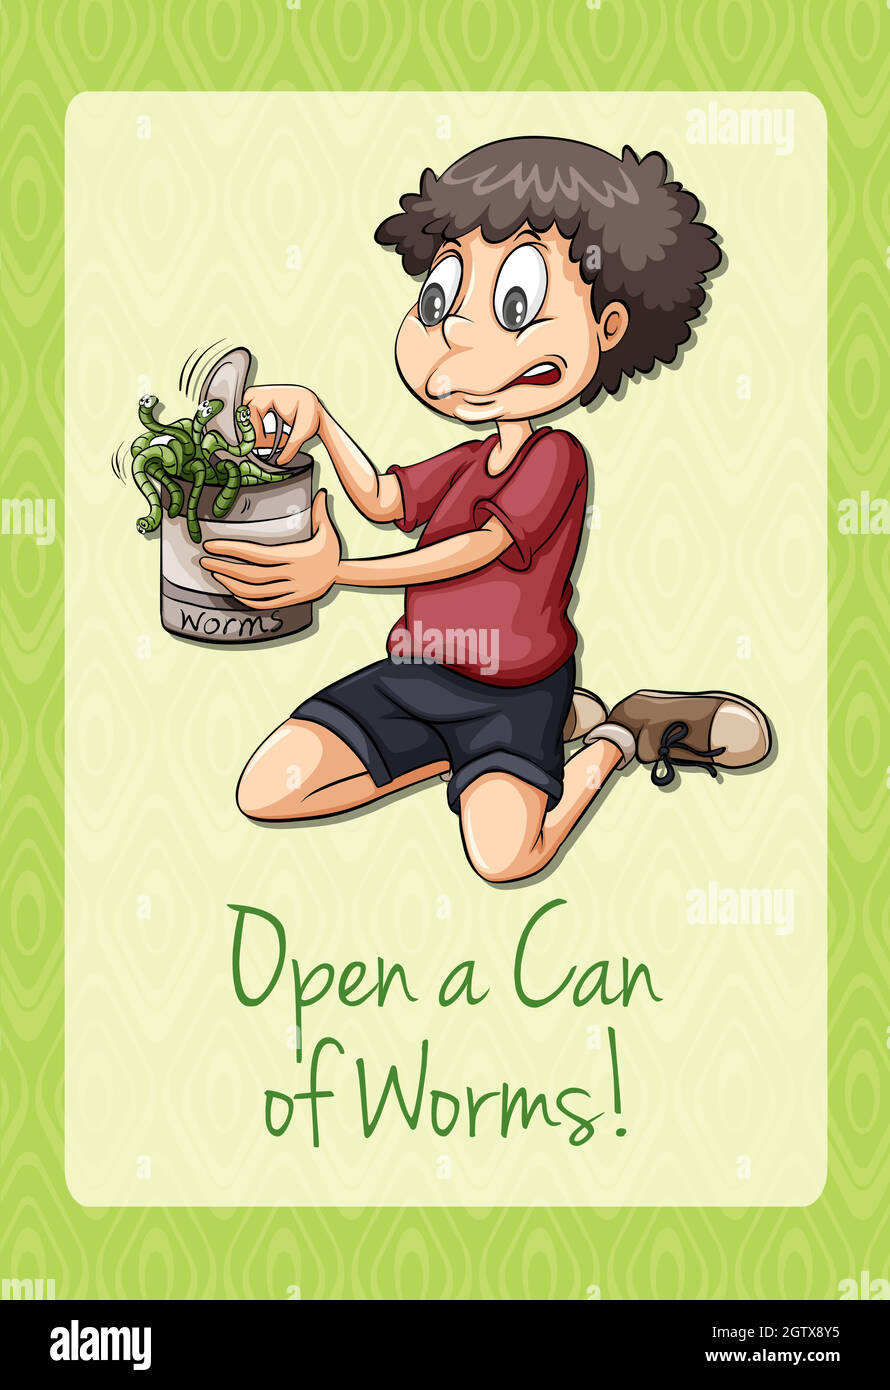 Idiom open can of worms Stock Vector